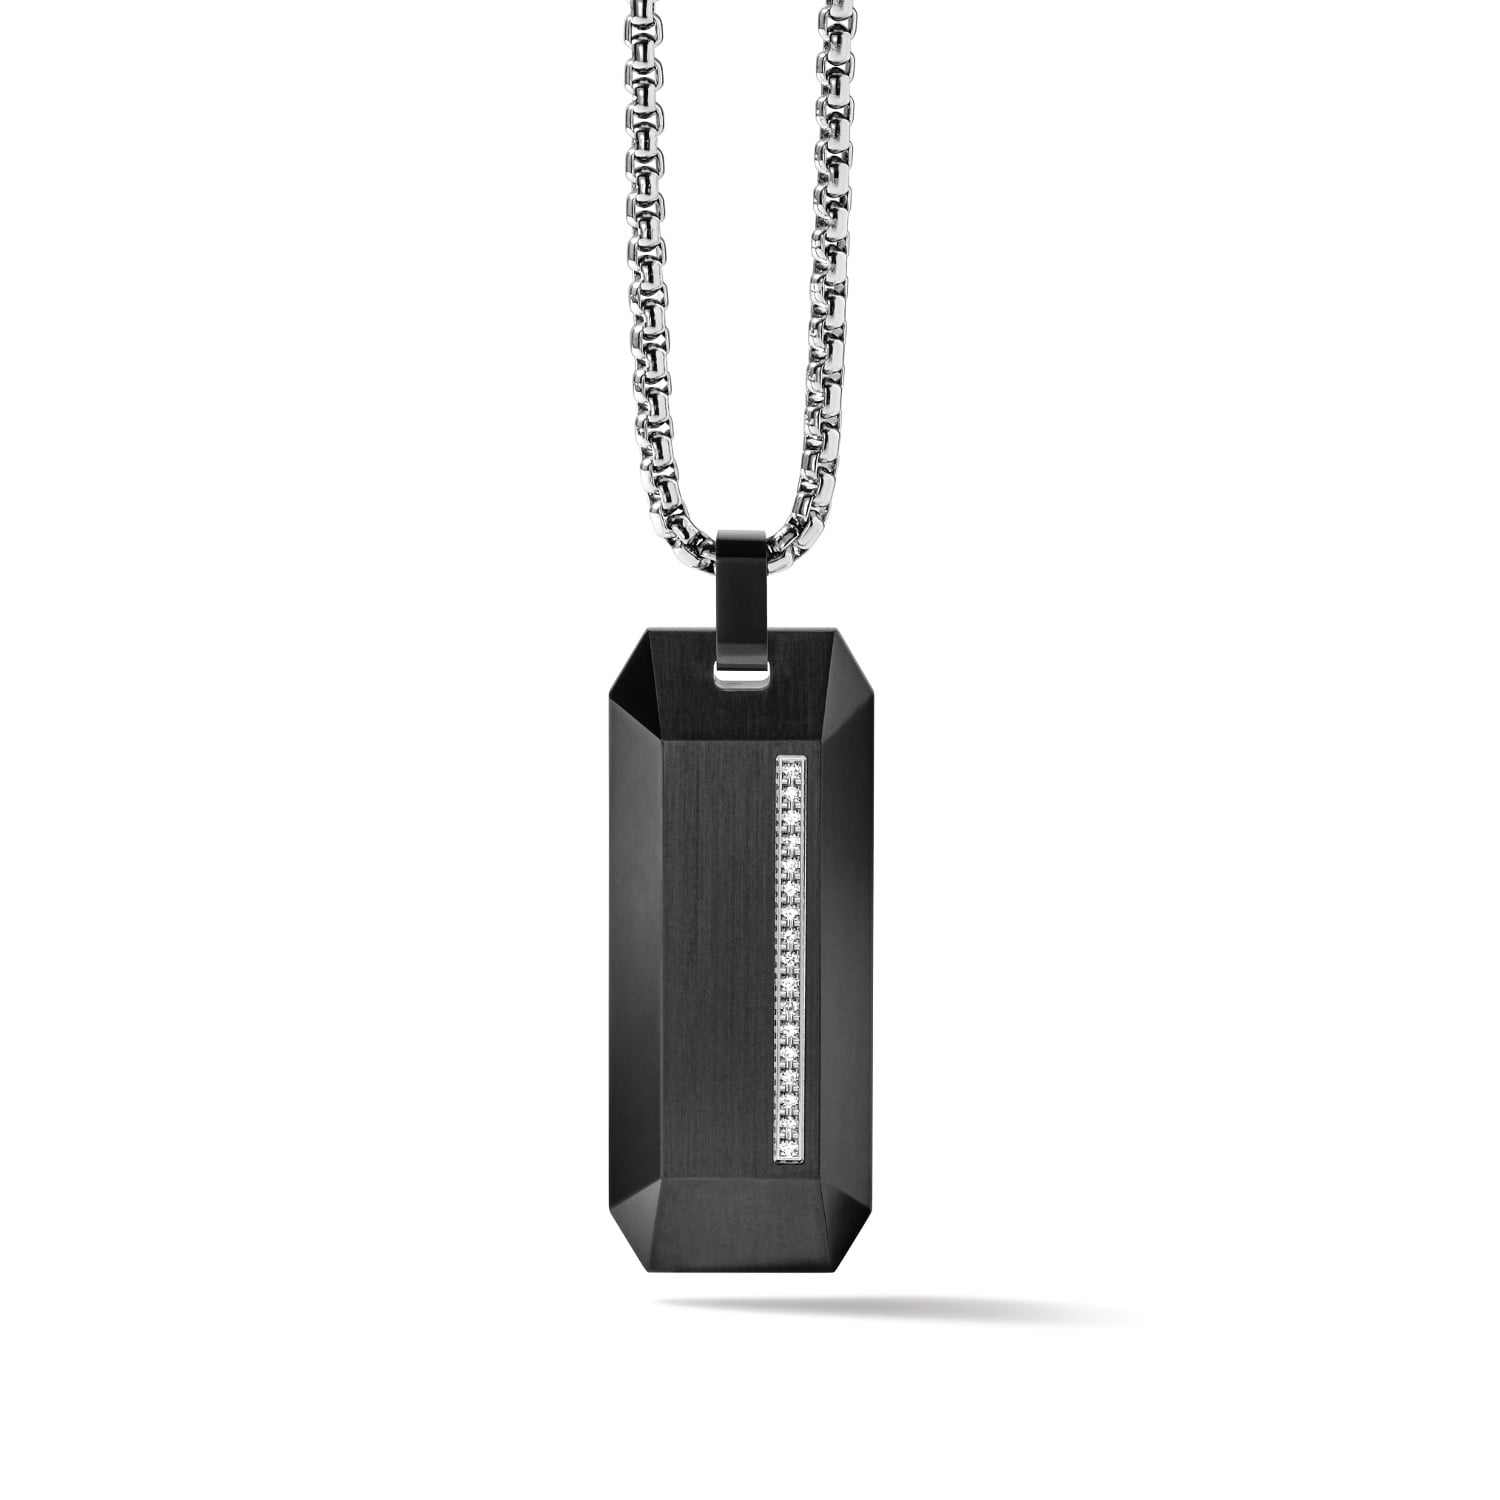 Men's Stainless Steel 1/2 Cttw Black Diamond Dog Tag Necklace, 24